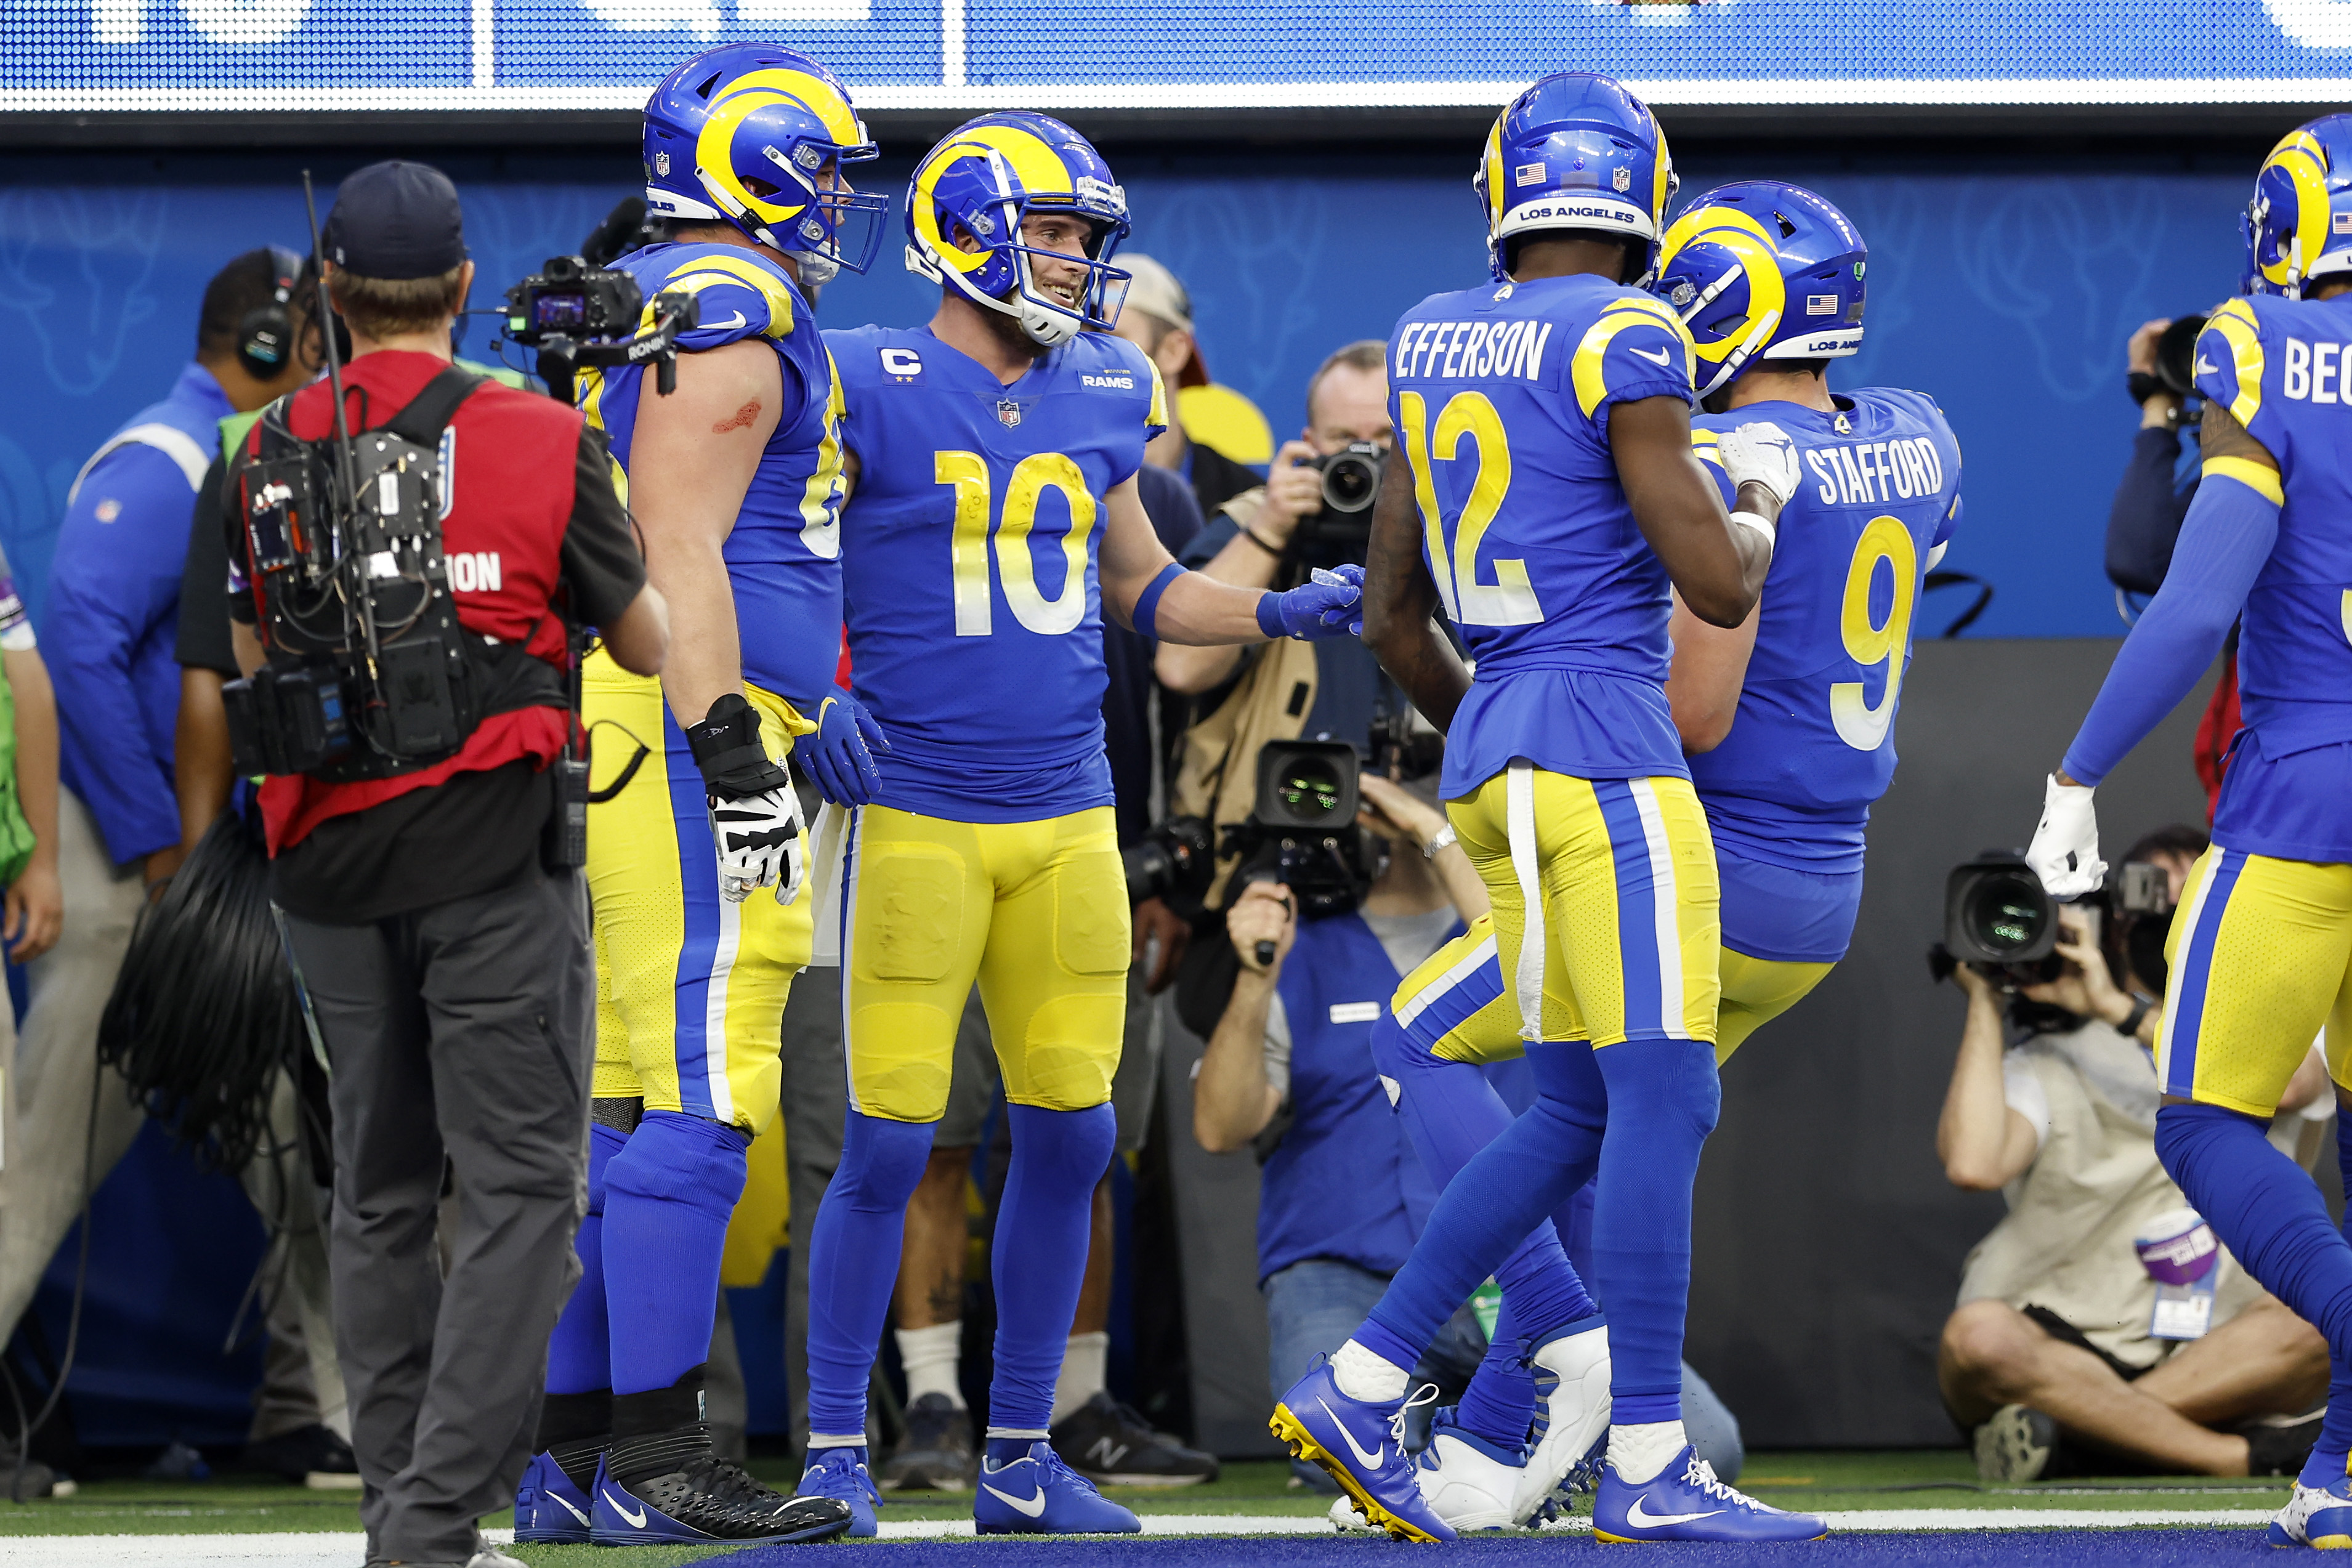 Los Angeles Rams Facts, Super Bowl History, Uniform Colors, Location and More Ahead of Super Bowl 56 in 2022